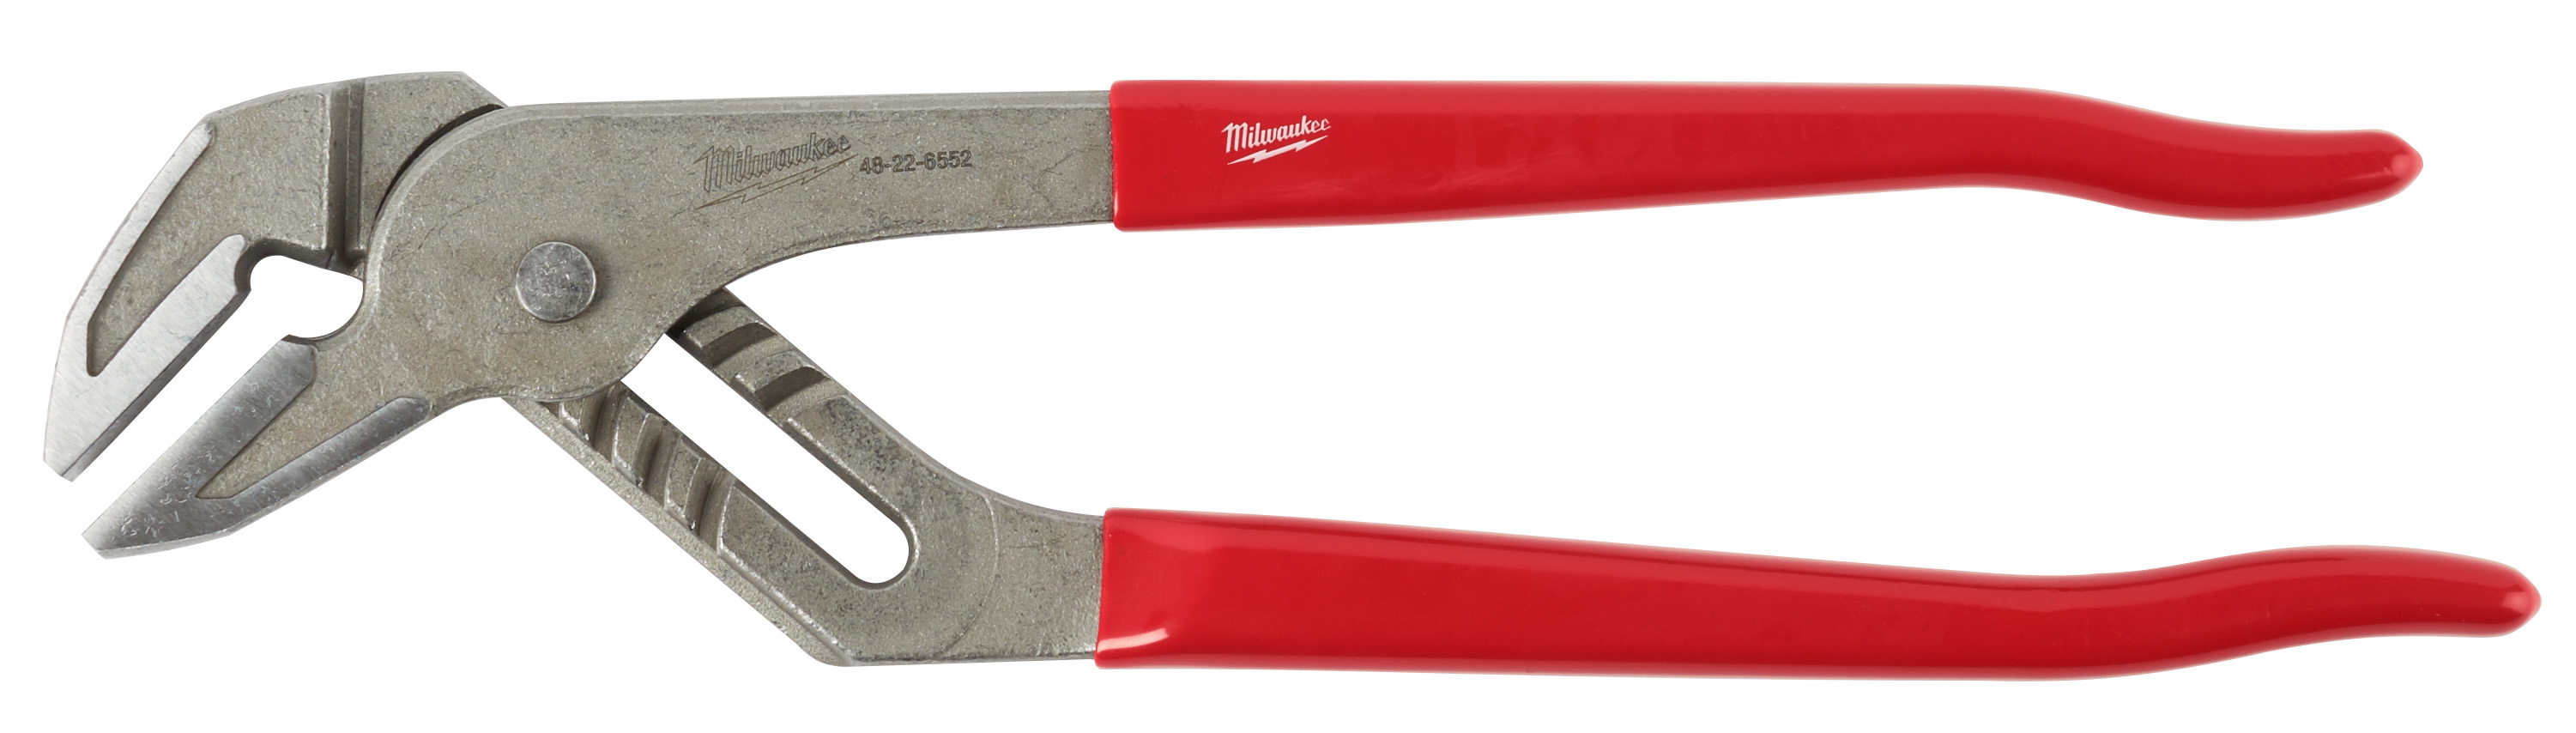 Milwaukee® 48-22-6552 Tongue and Groove Plier, 3 in Nominal, 1-1/2 in L x 1/2 in W Steel Smooth Jaw, 12 in OAL